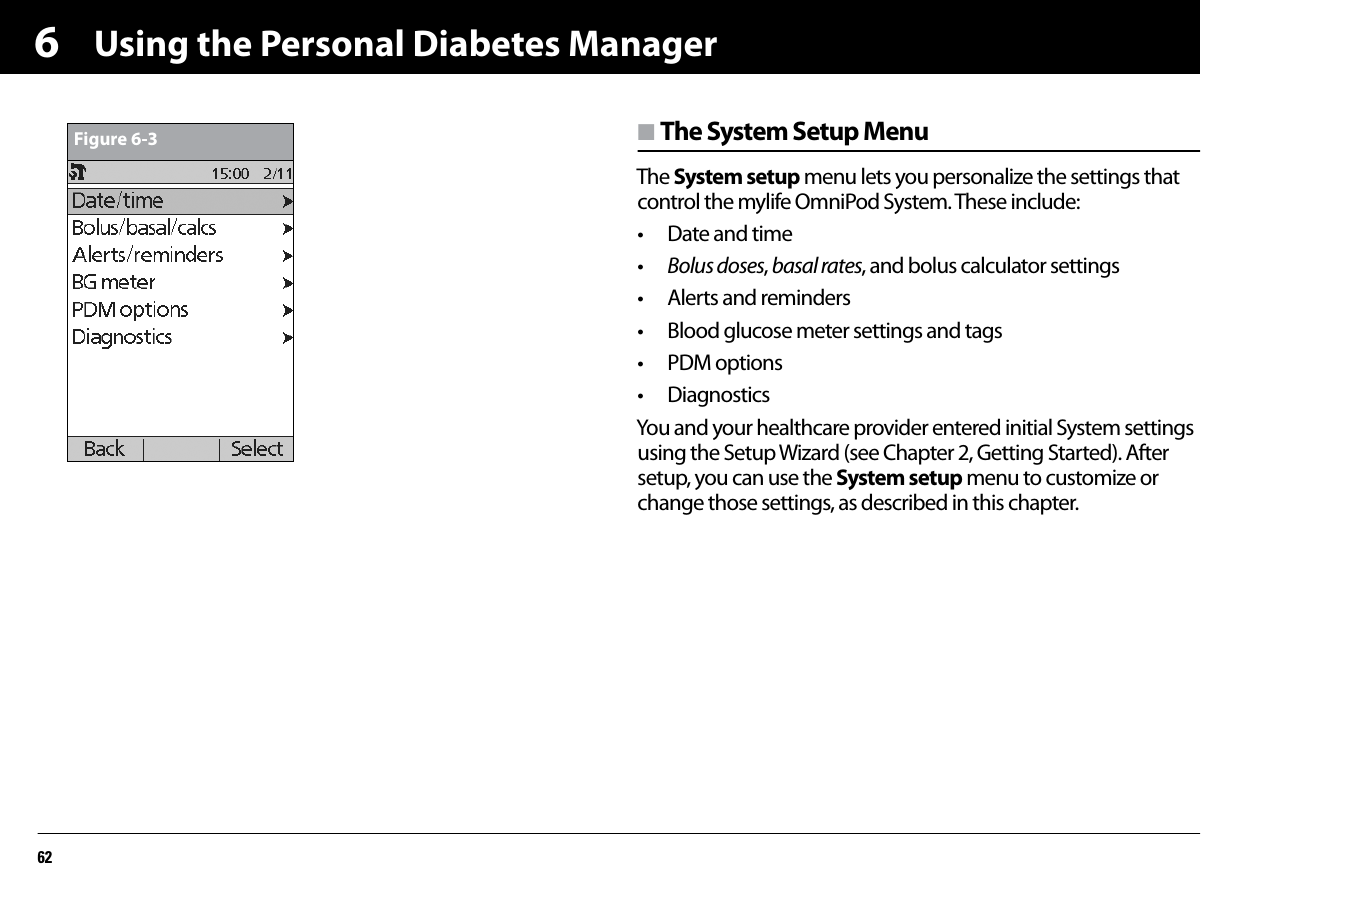 Using the Personal Diabetes Manager626n The System Setup MenuThe System setup menu lets you personalize the settings that control the mylife OmniPod System. These include:• Date and time•Bolus doses, basal rates, and bolus calculator settings• Alerts and reminders• Blood glucose meter settings and tags• PDM options• DiagnosticsYou and your healthcare provider entered initial System settings using the Setup Wizard (see Chapter 2, Getting Started). After setup, you can use the System setup menu to customize or change those settings, as described in this chapter.Figure 6-3